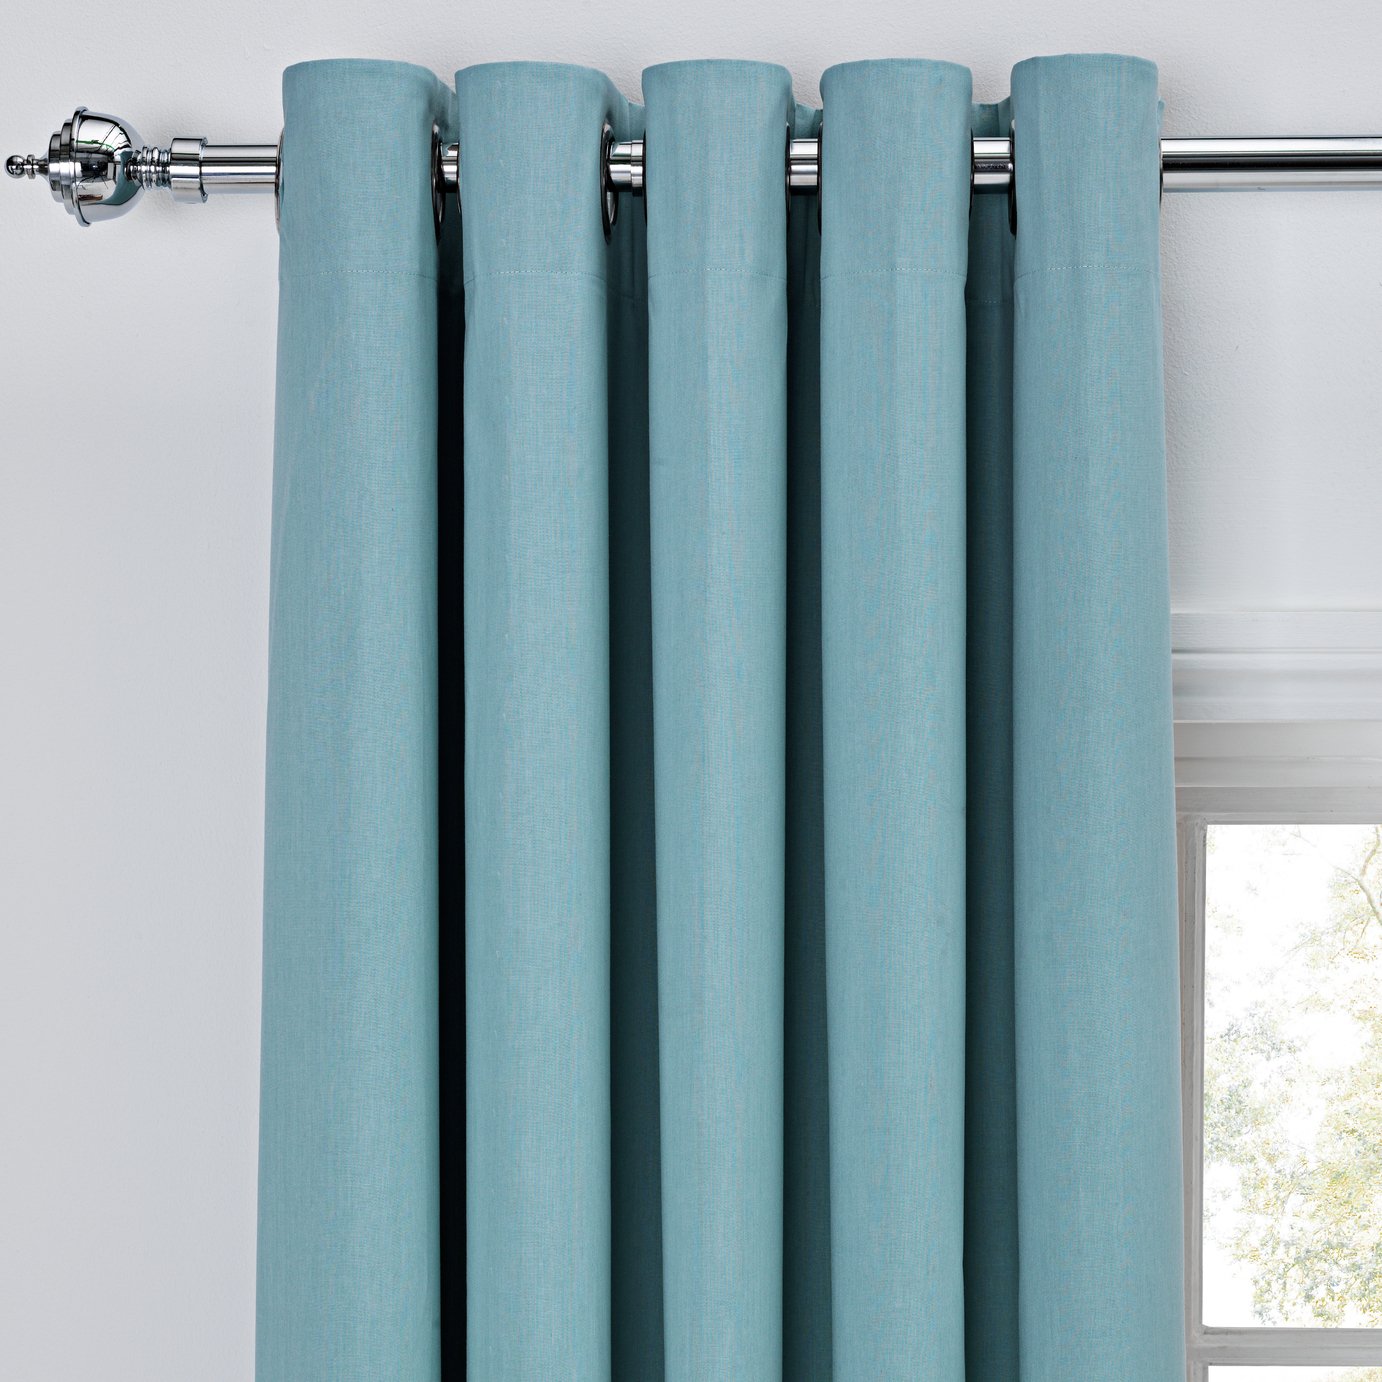 ColourMatch Thermal Blackout Curtains - 168x183cm - Duck Egg